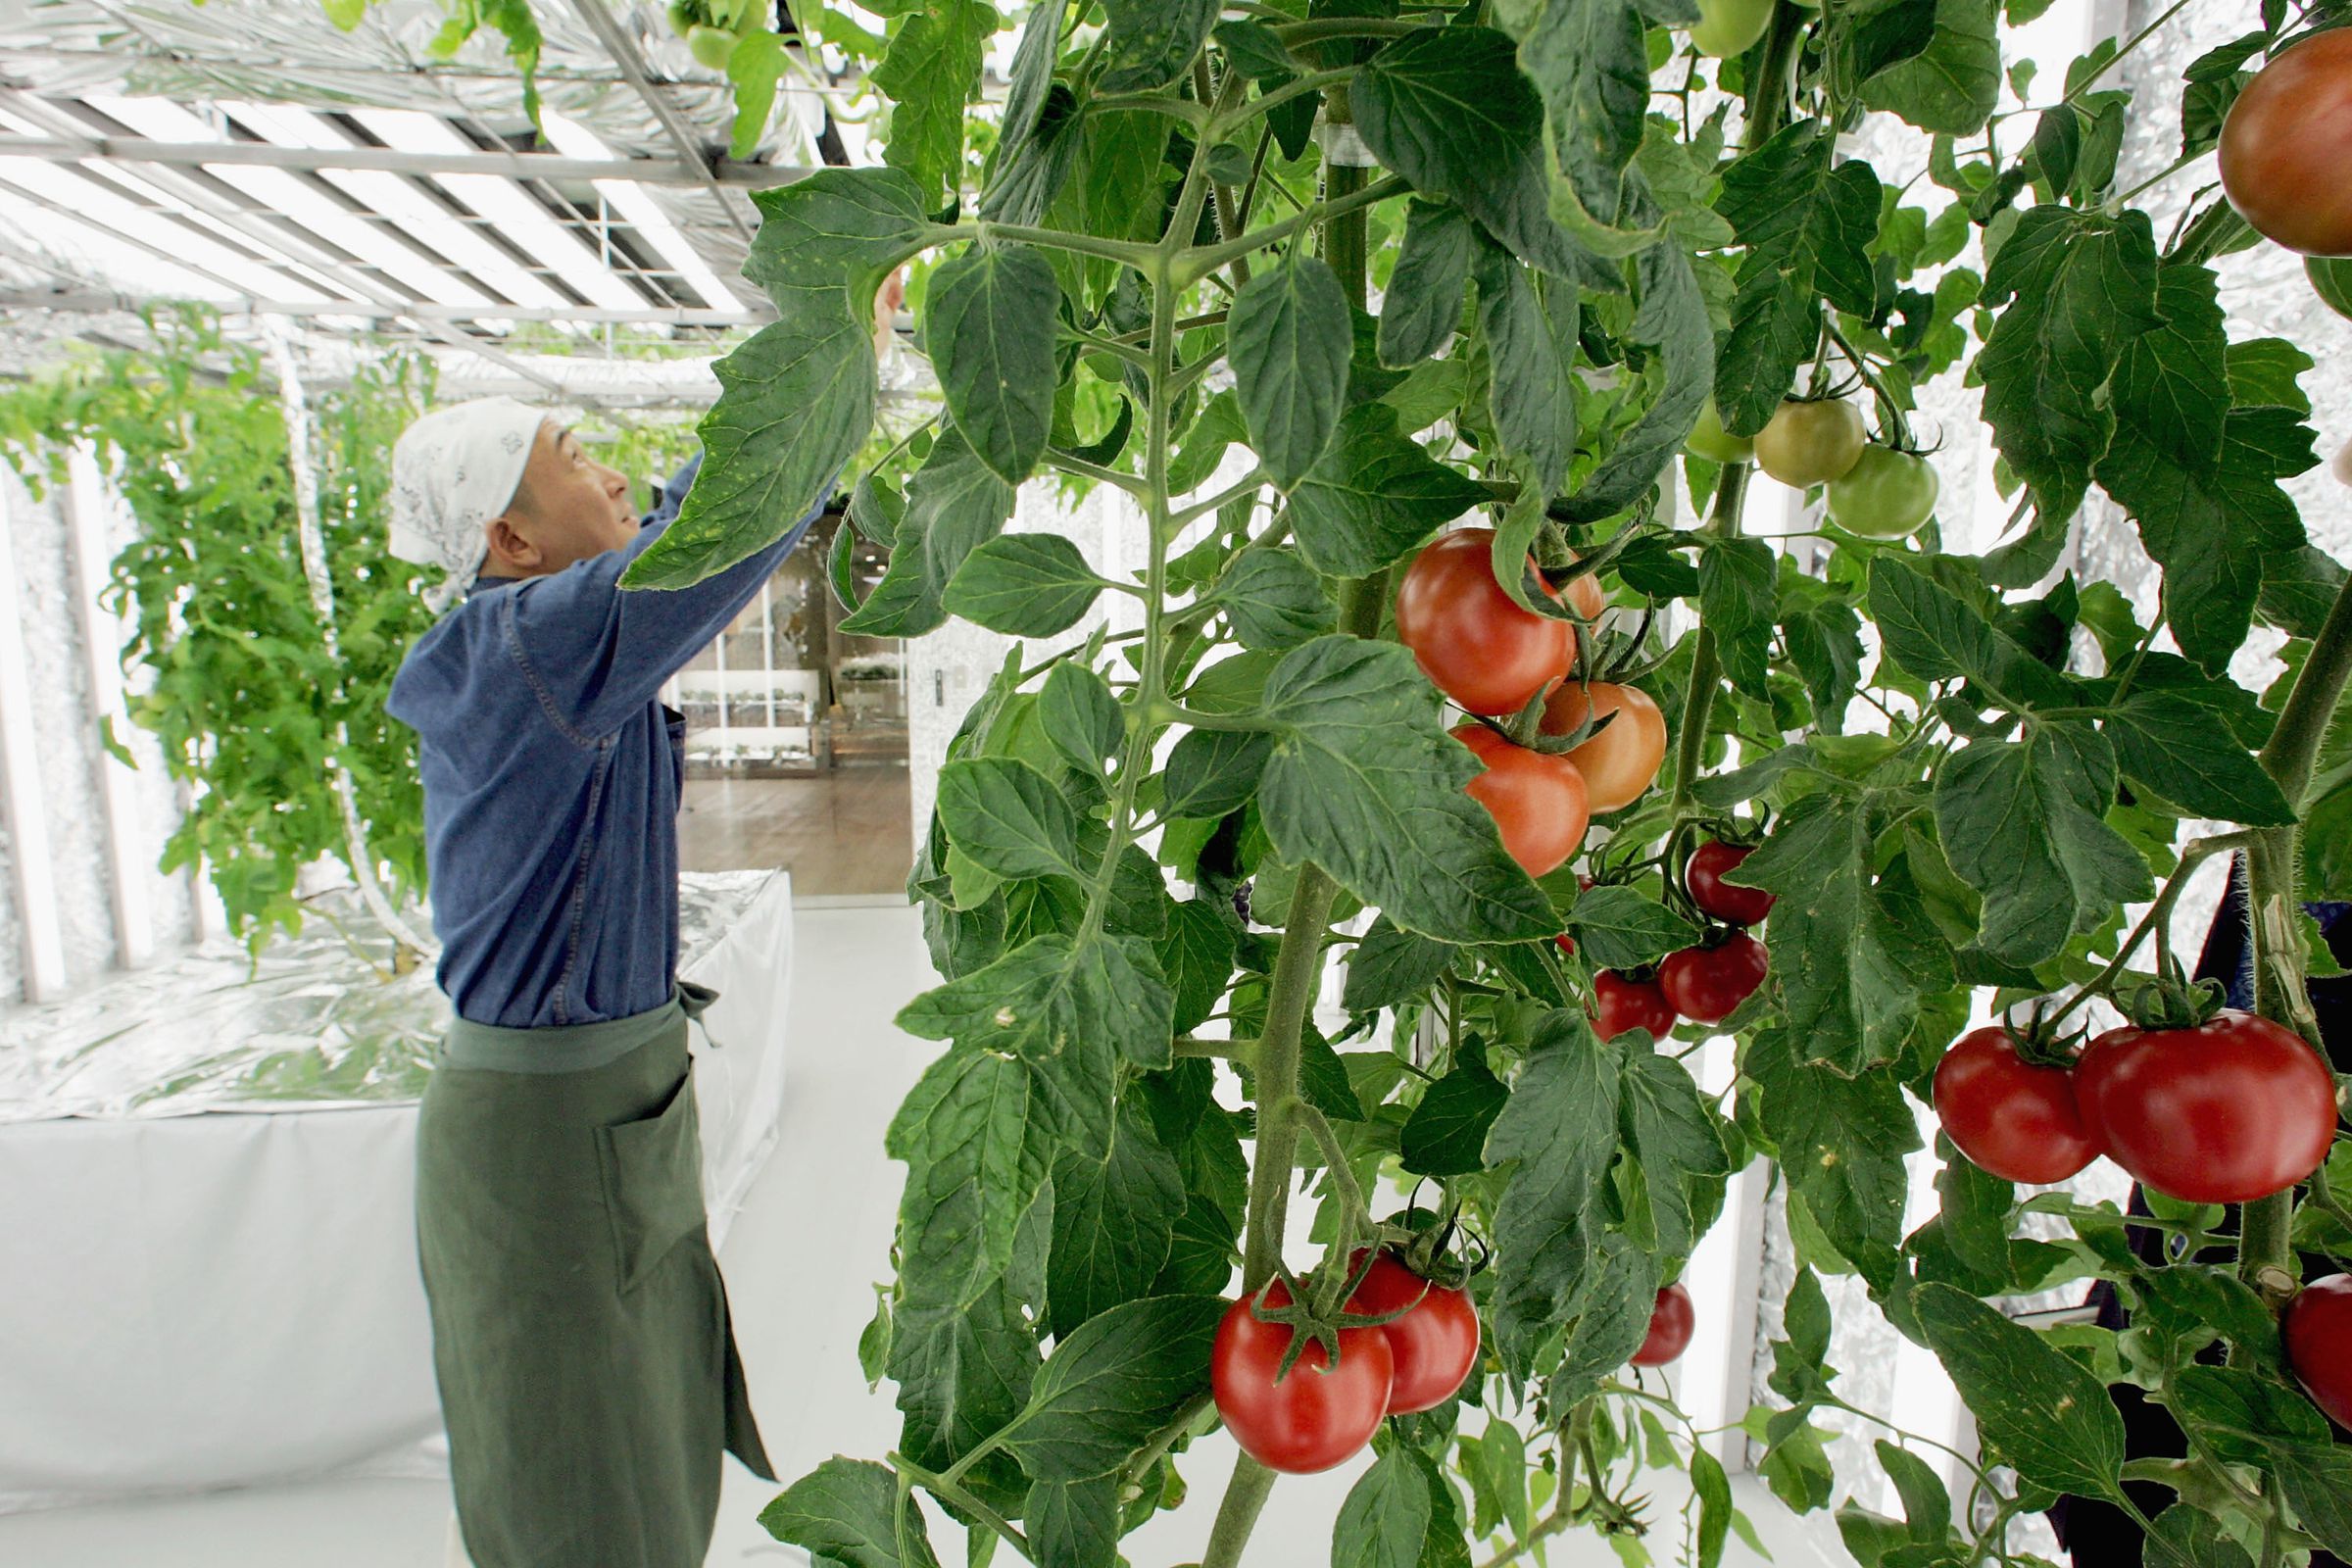 Basement Greenhouse Introduces City Dwellers To Farming